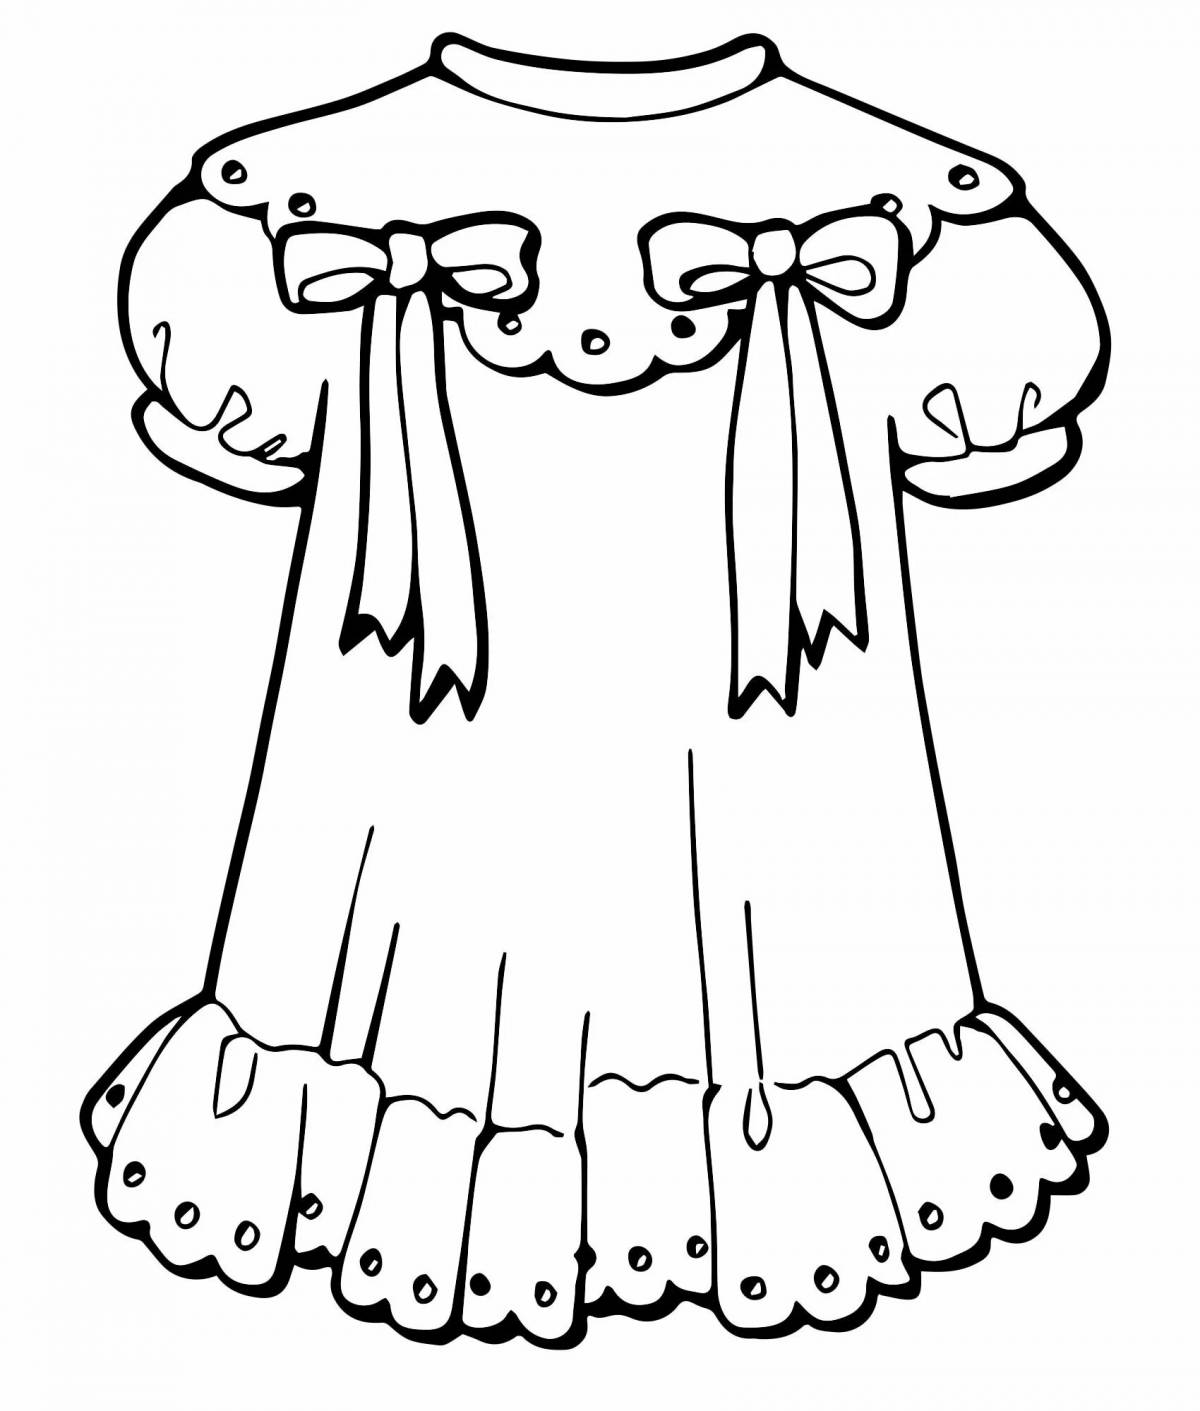 Coloring party dress for kids